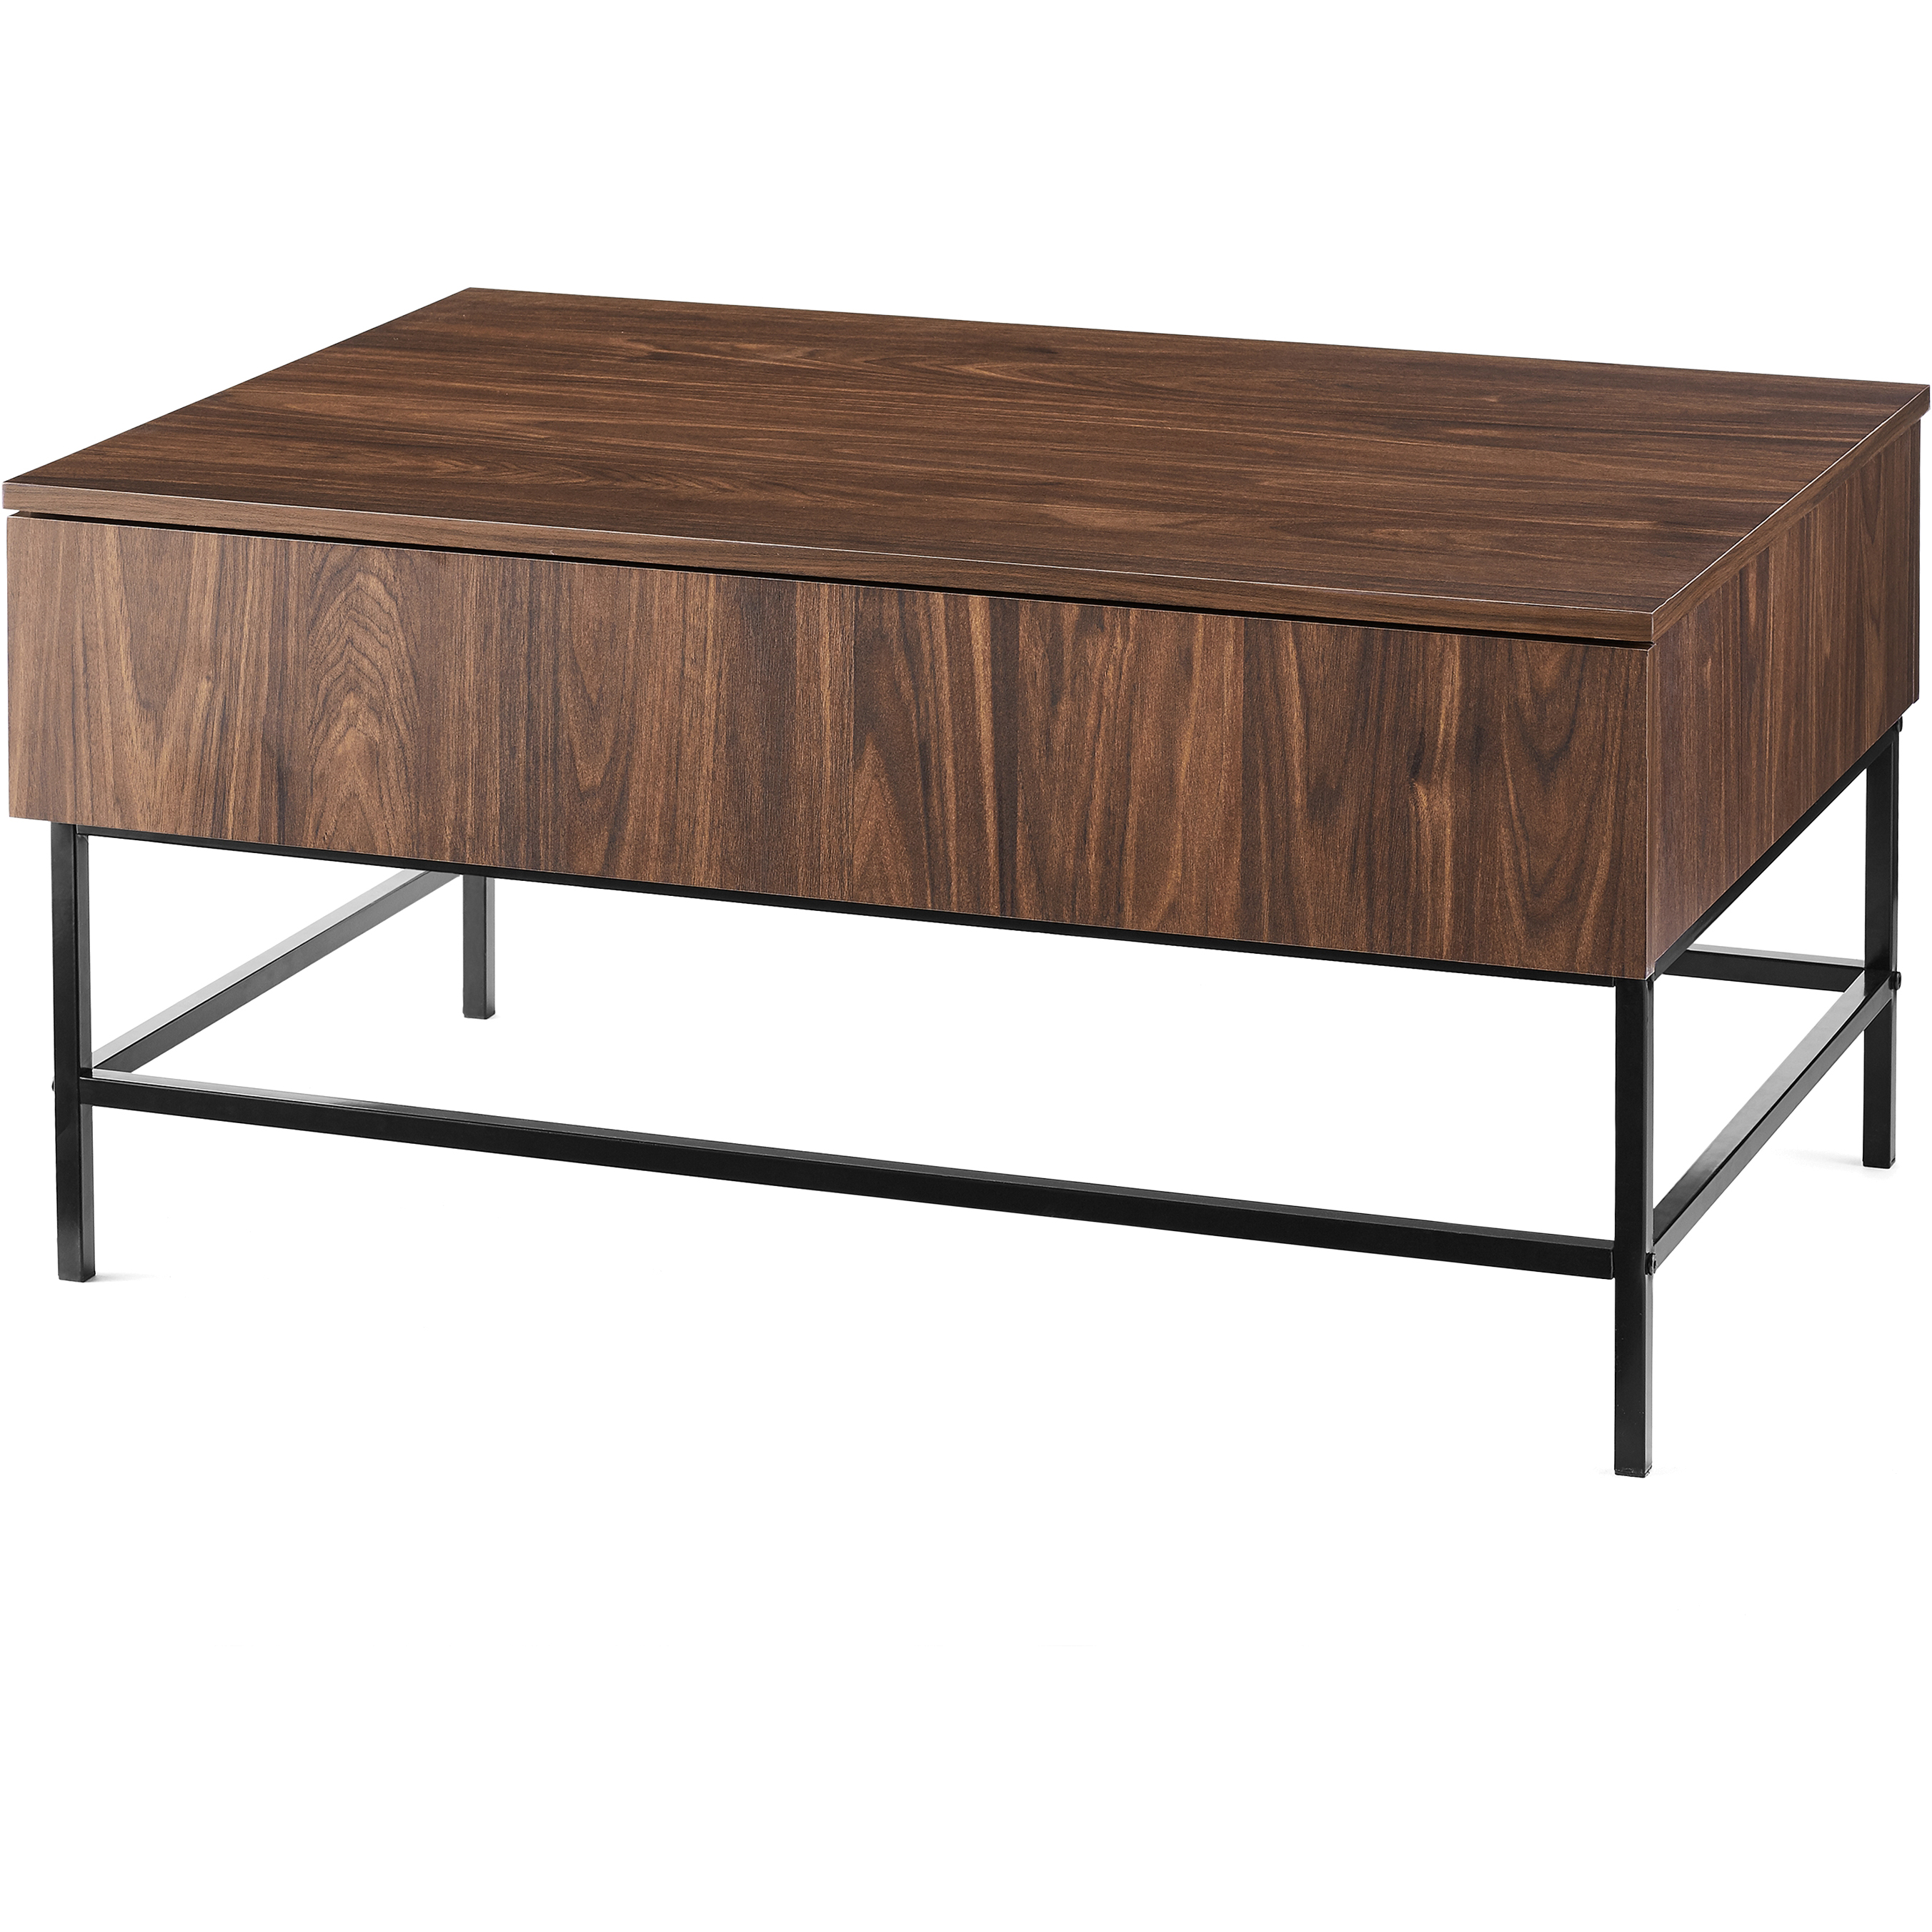 Mainstays Sumpter Park Coffee Table, Multiple Finishes - image 3 of 6